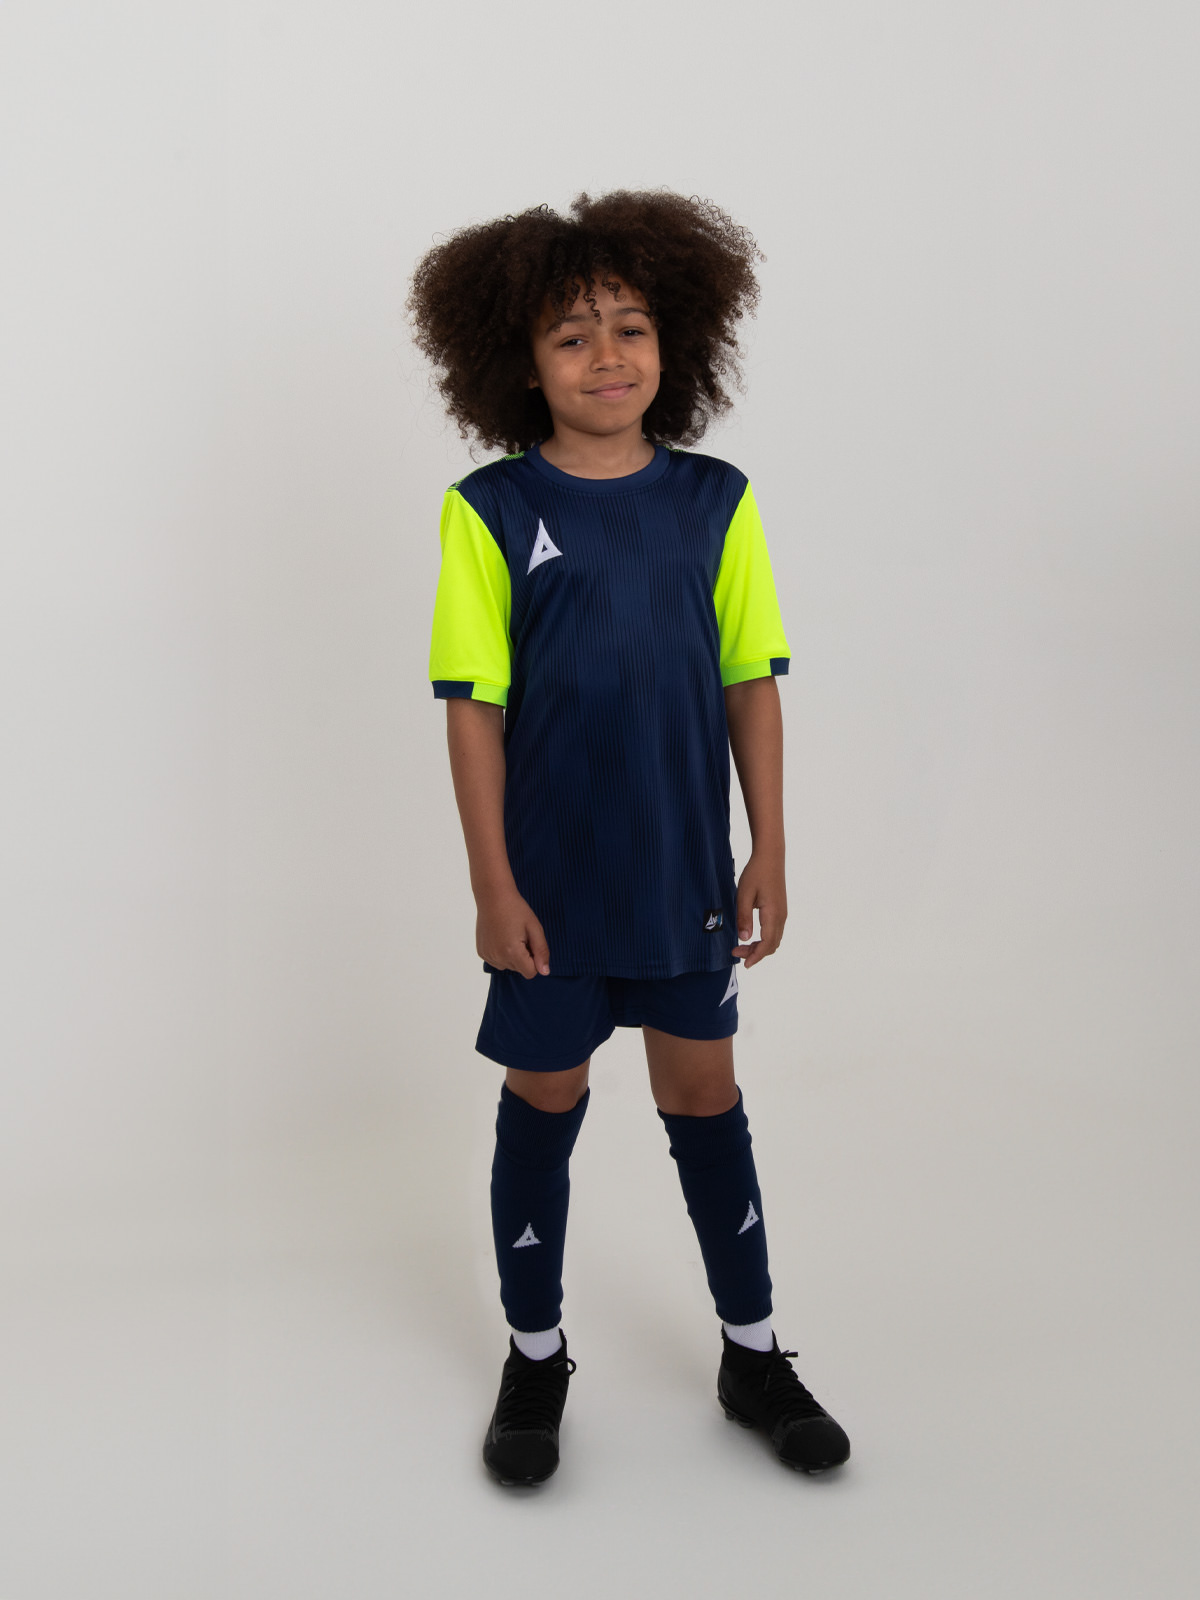 a kids football kit in navy blue with yellow sleeves